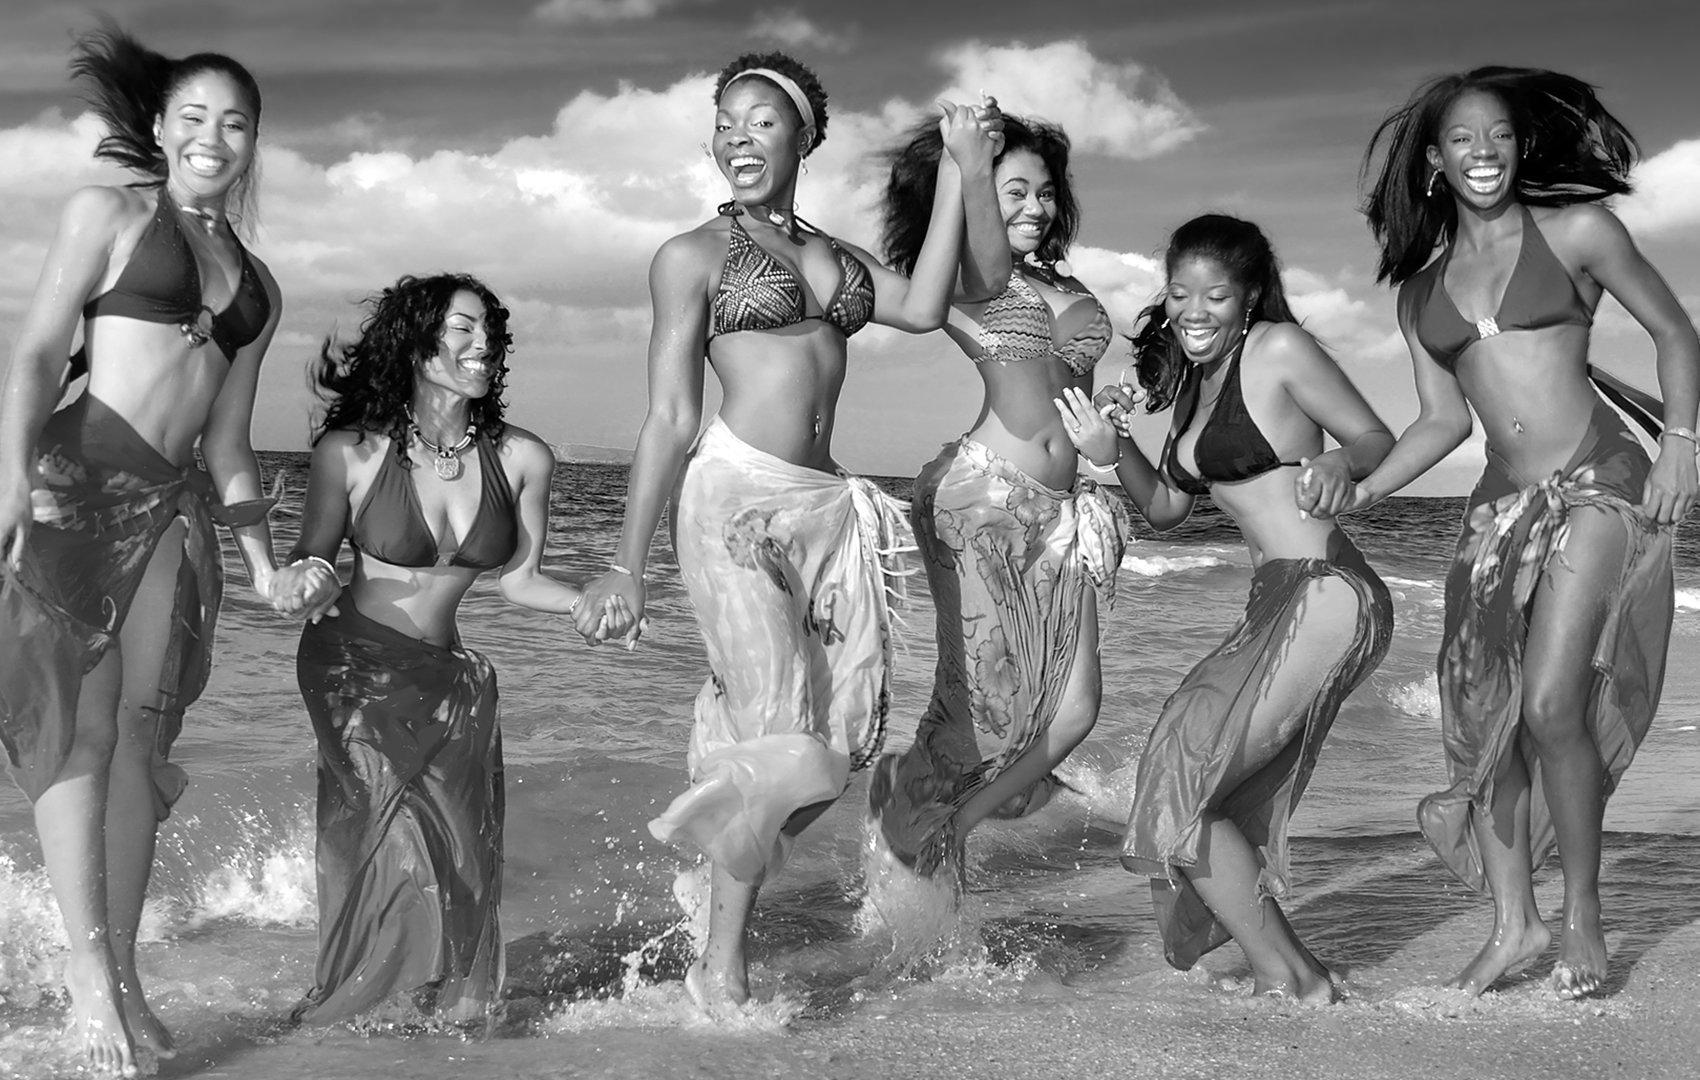 Off to Africa for vacation so they stopped on  Maui for a beach party.  Beauty padjents have fun ion hawaii.